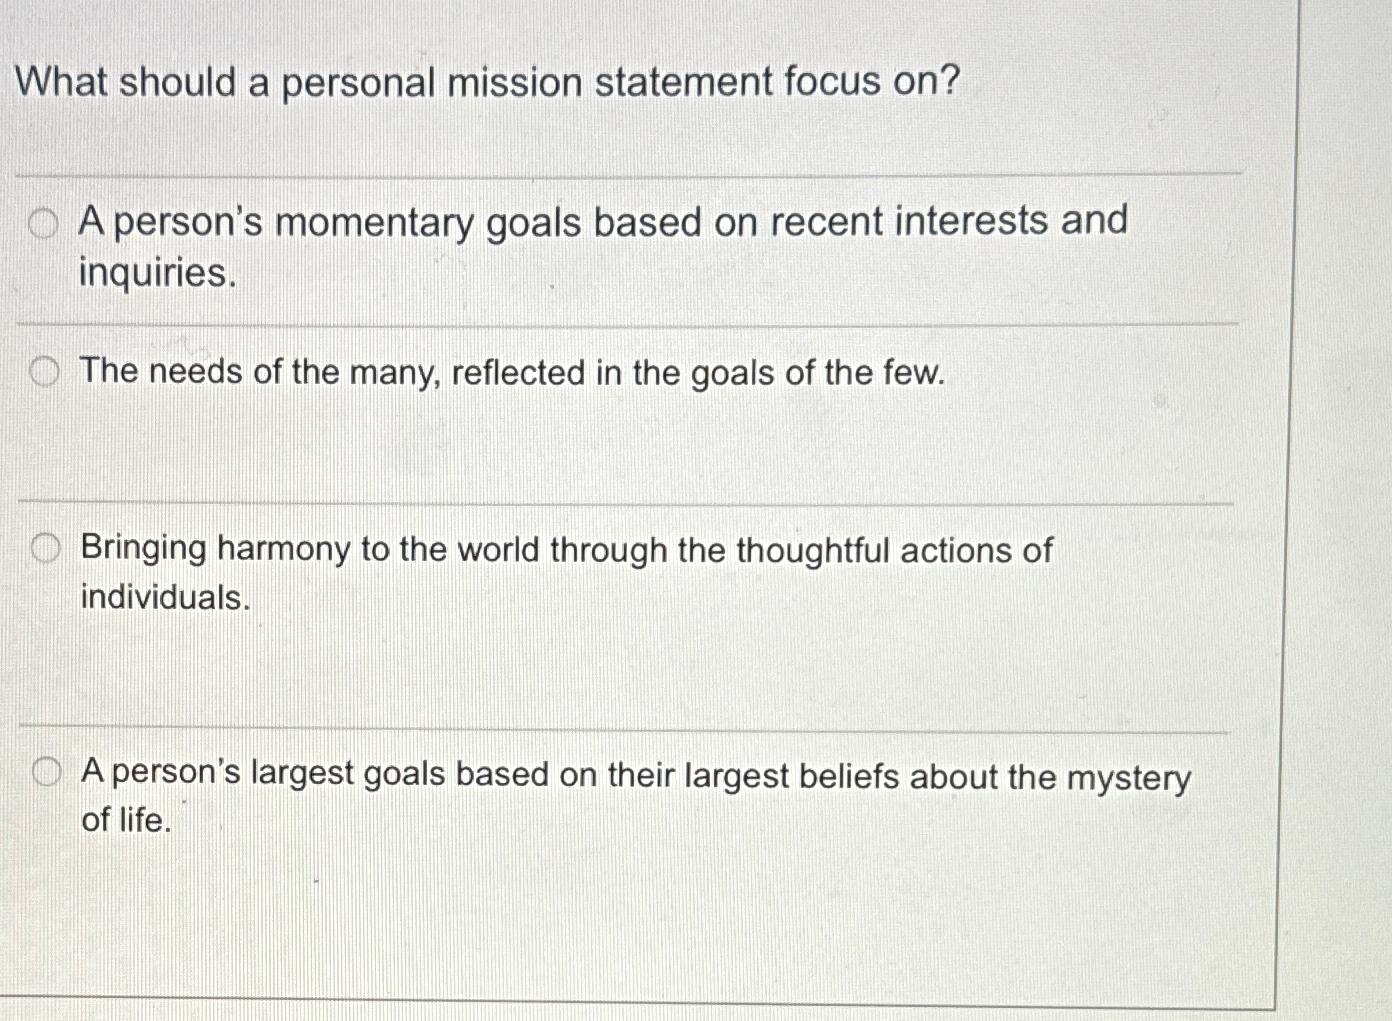 What should a personal mission statement focus on? A person's momentary goals based on recent interests and